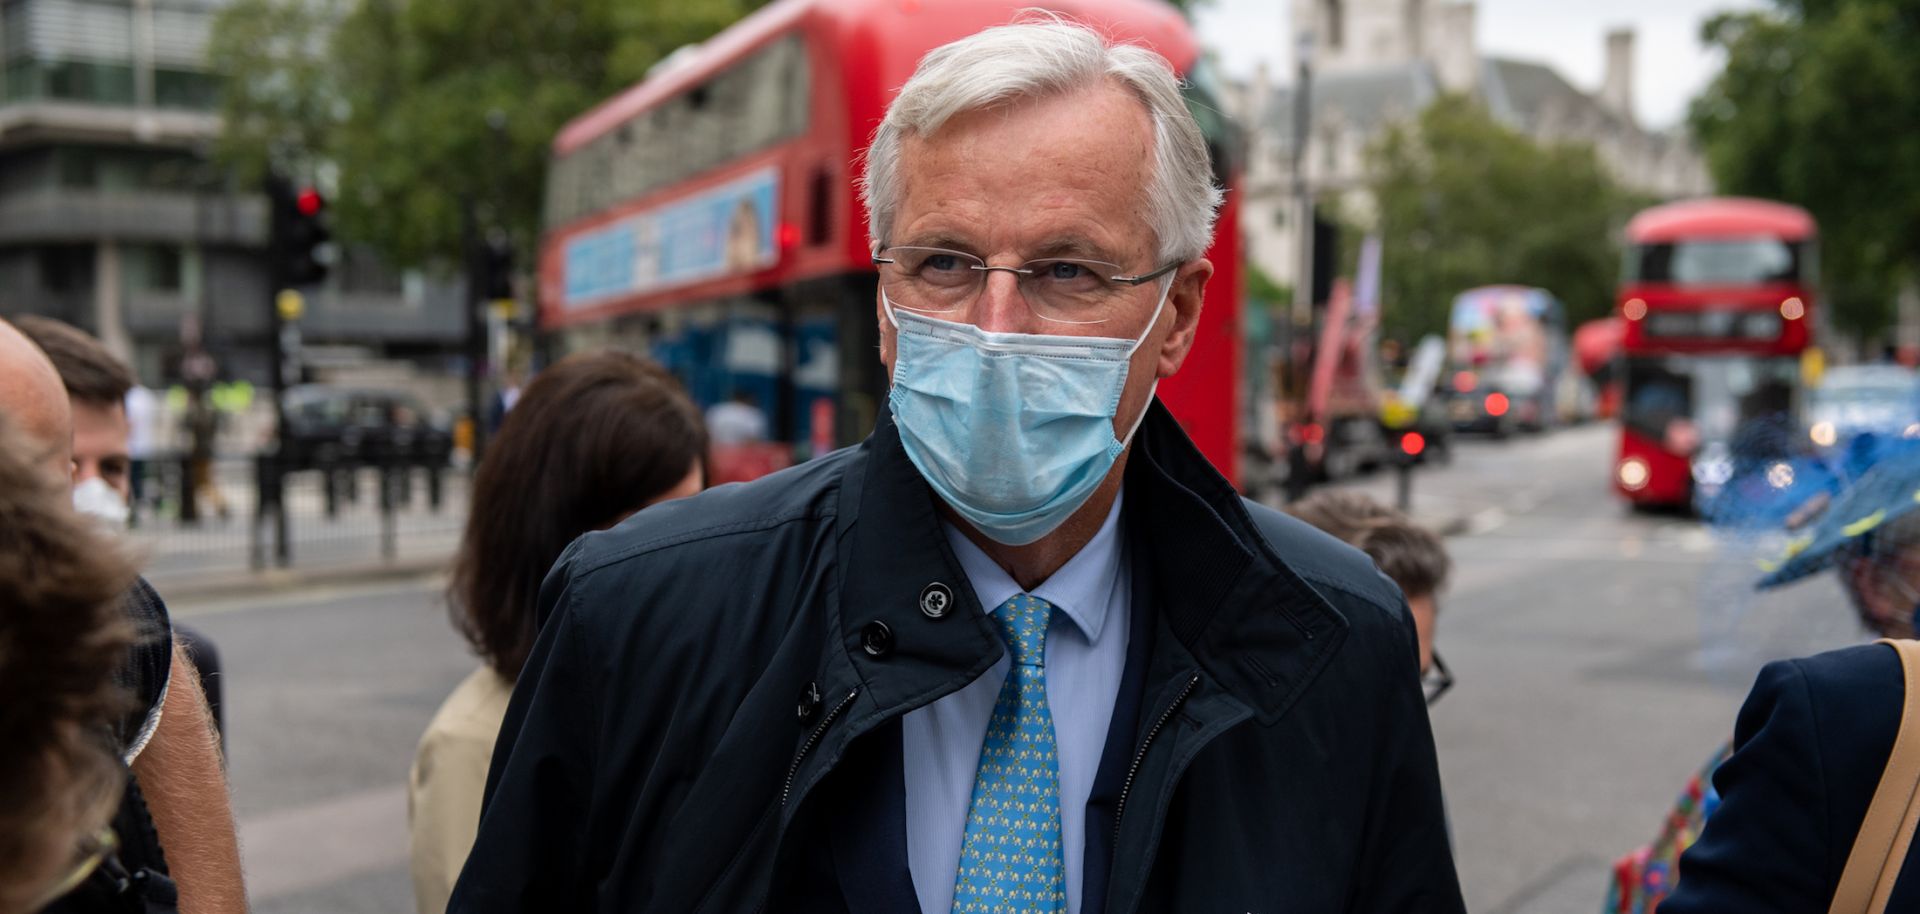 Michel Barnier, the European Union's chief negotiator in ongoing trade talks with the United Kingdom, arrives at a meeting with his team in London on Sept. 9, 2020. 